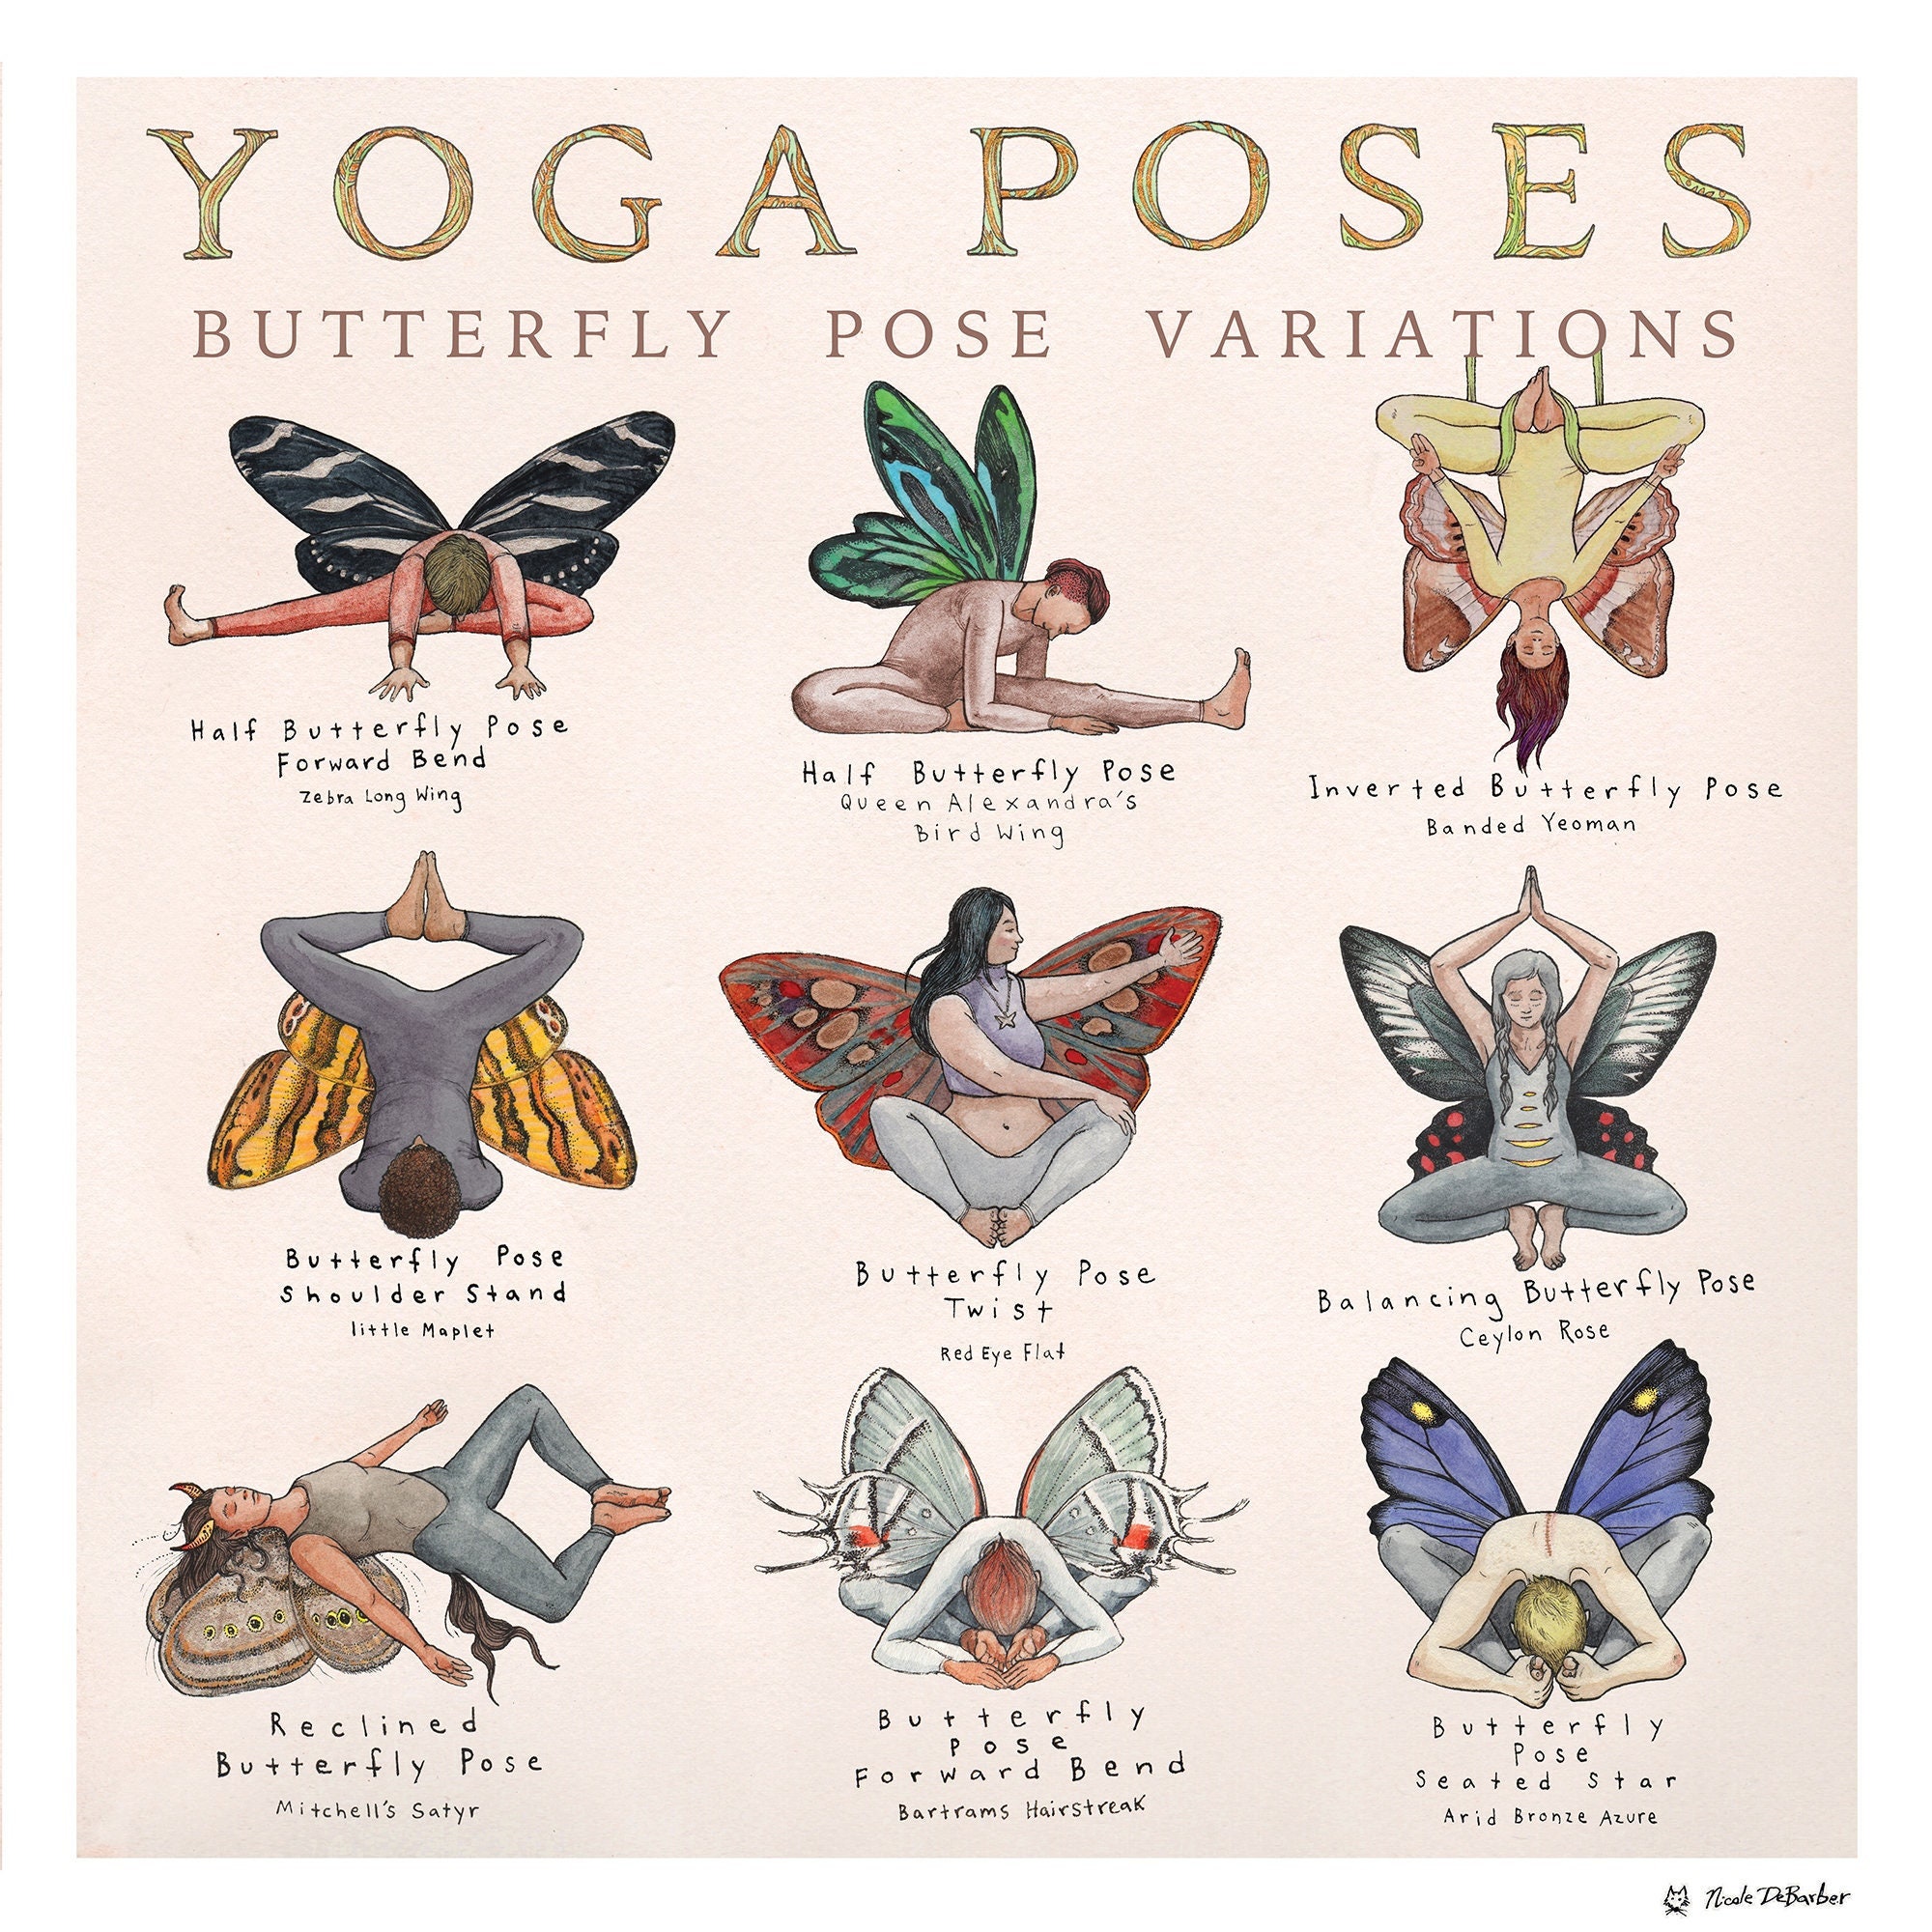 Overview of Butterfly Pose